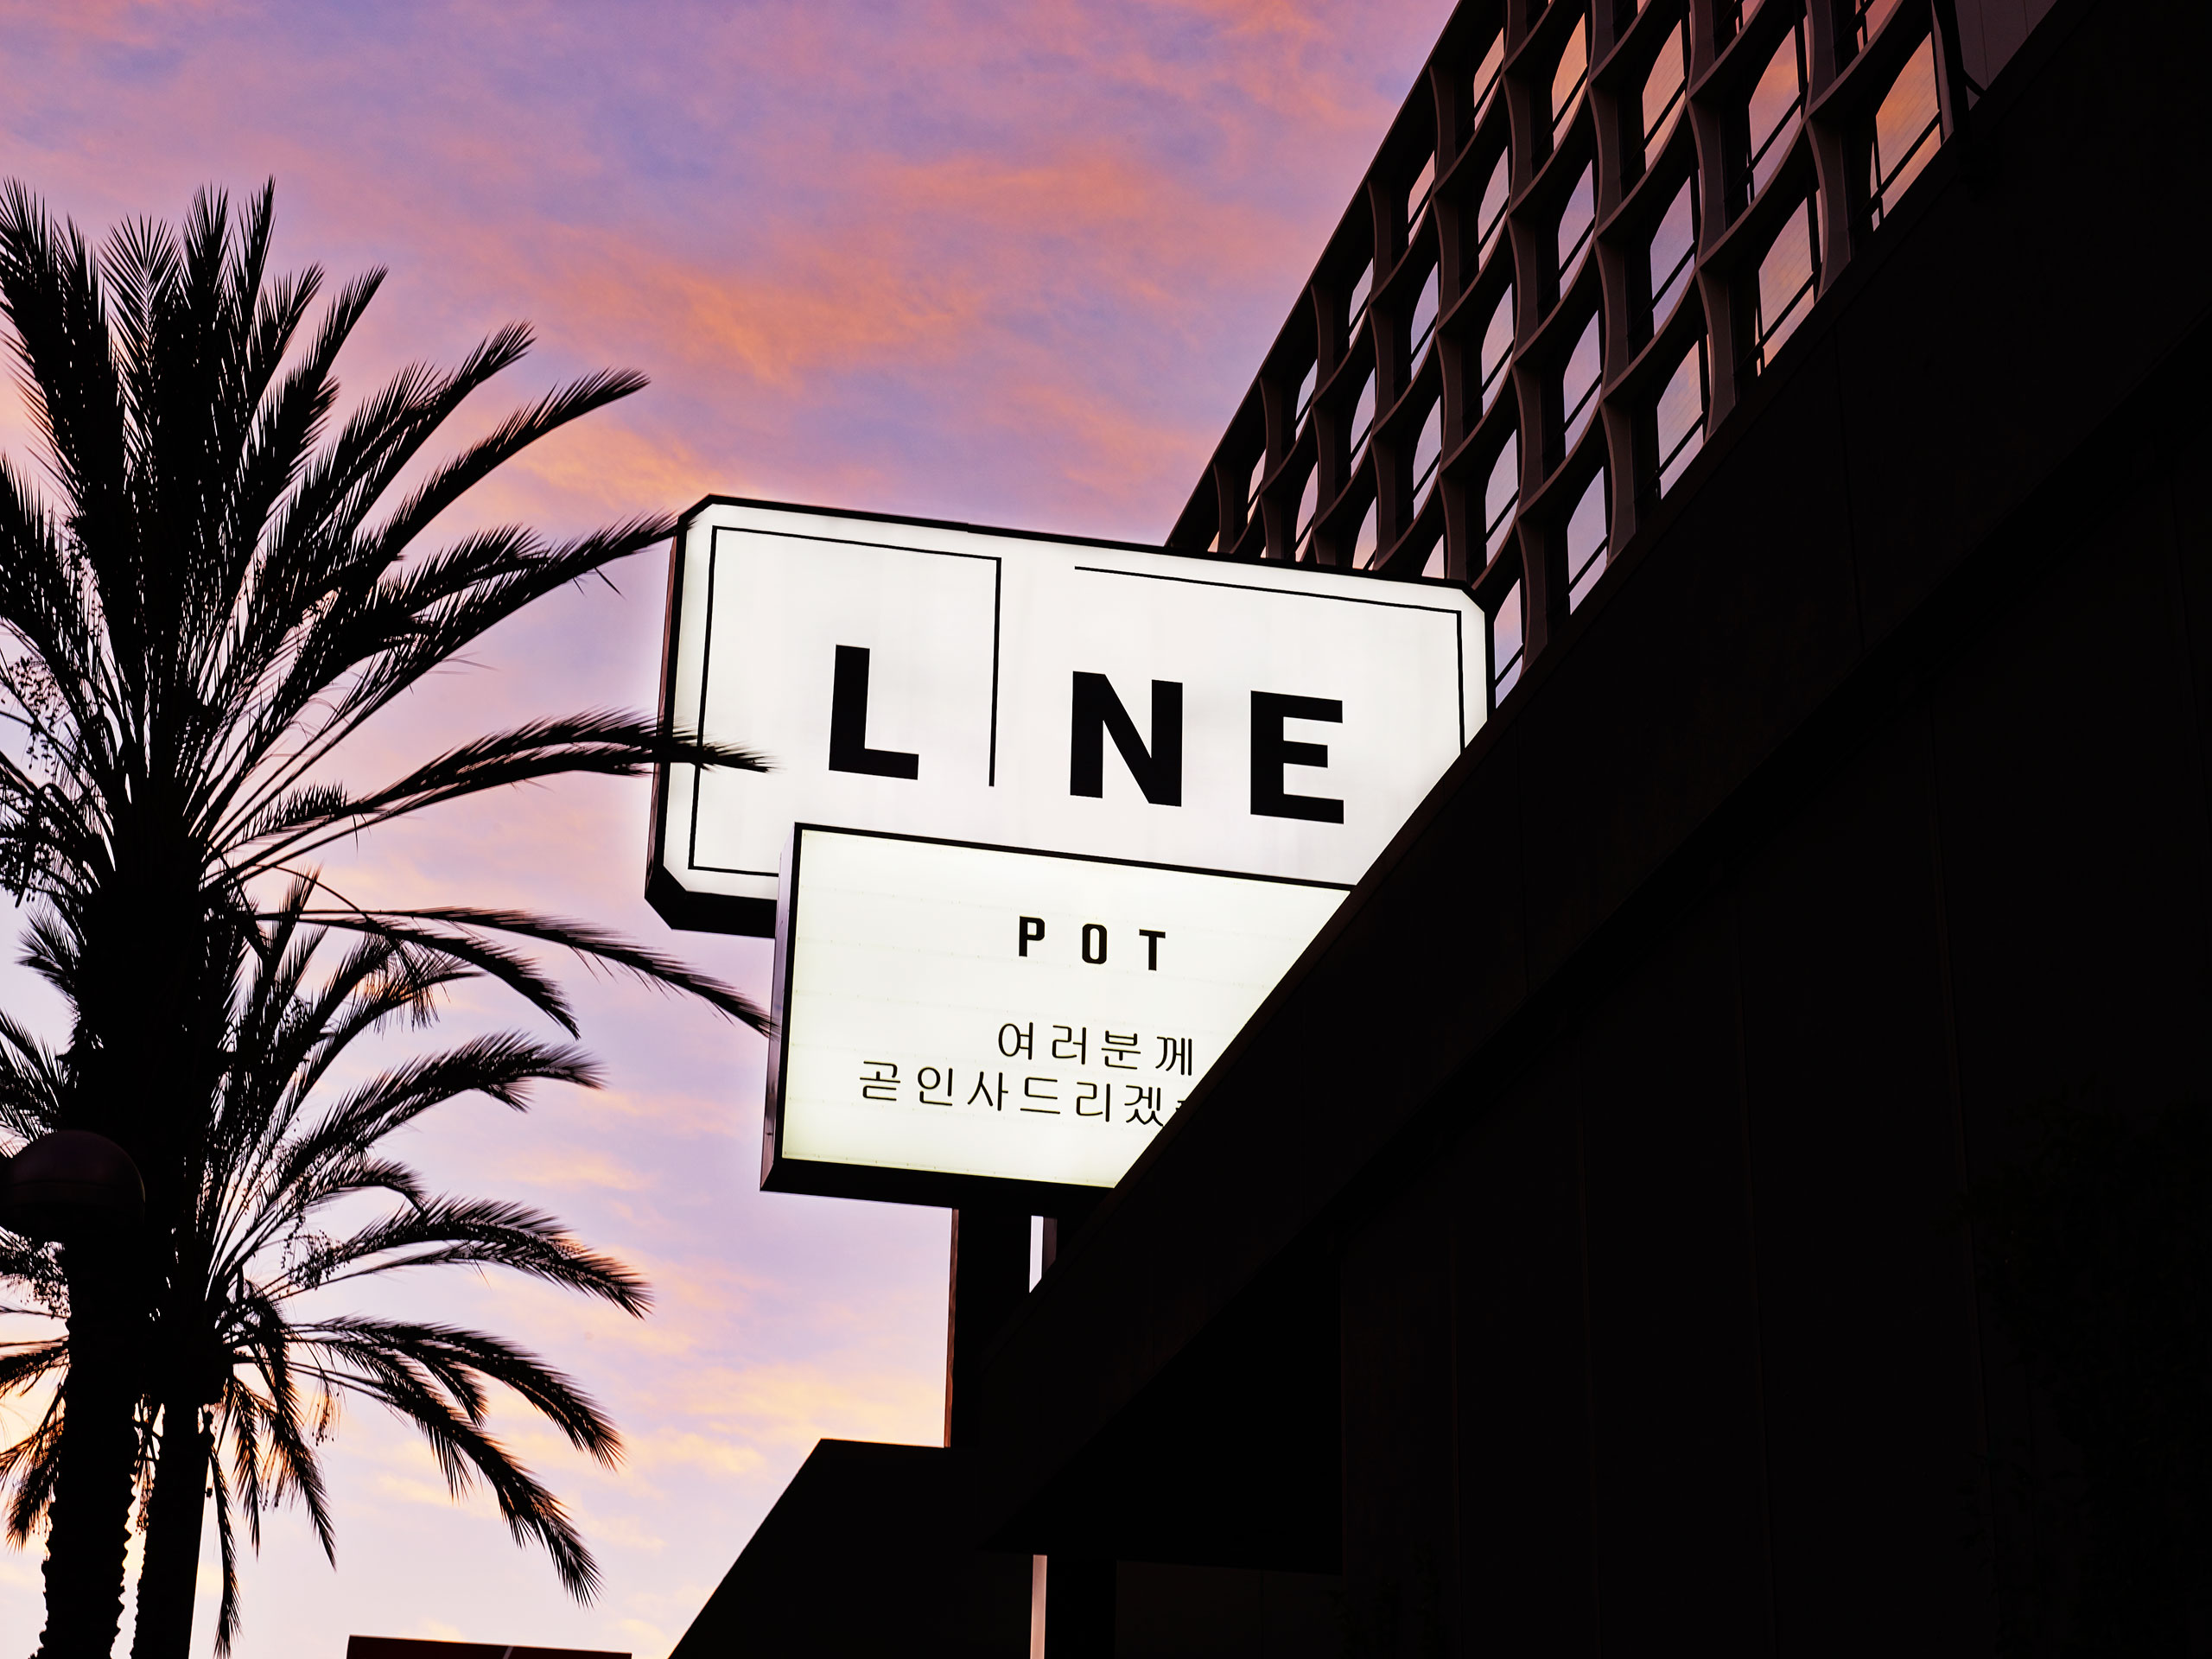 photo by Adrian Gaut, © The Line Hotel, L.A.